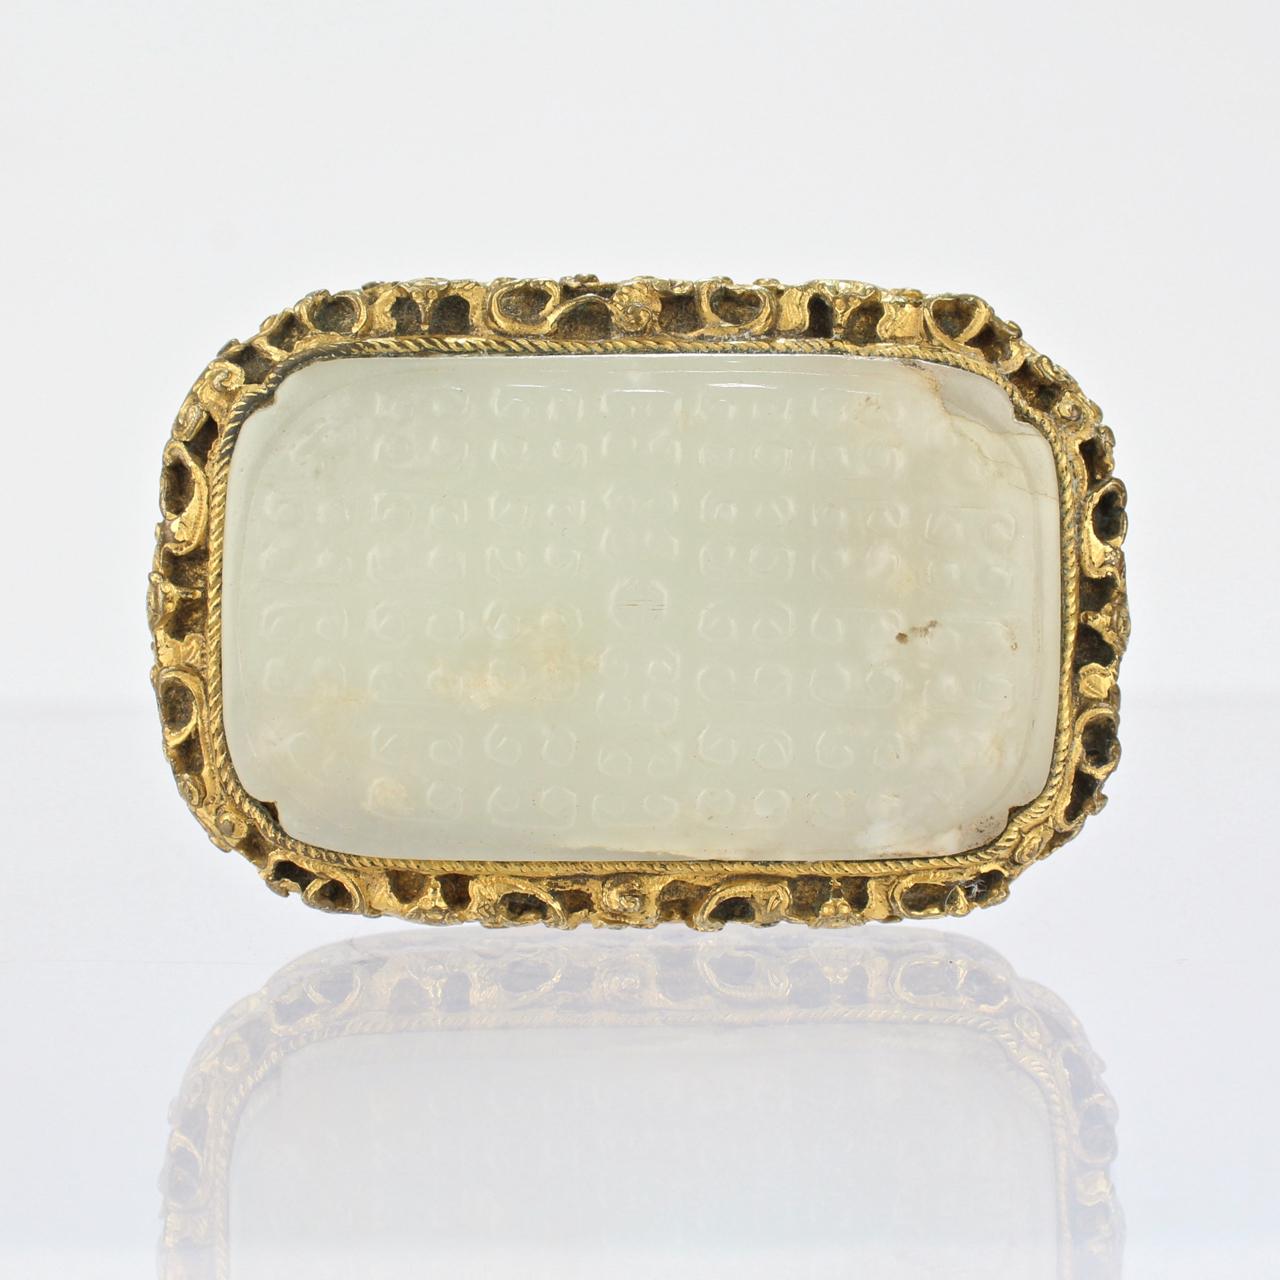 A fine antique Chinese gilt bronze belt buckle set with a rectangular carved jade plaque.

The ornate frame appears to be fire gilt. The pale celadon color jade is carved with an archaic style pattern.

Dating to the early 19th or possibly 18th